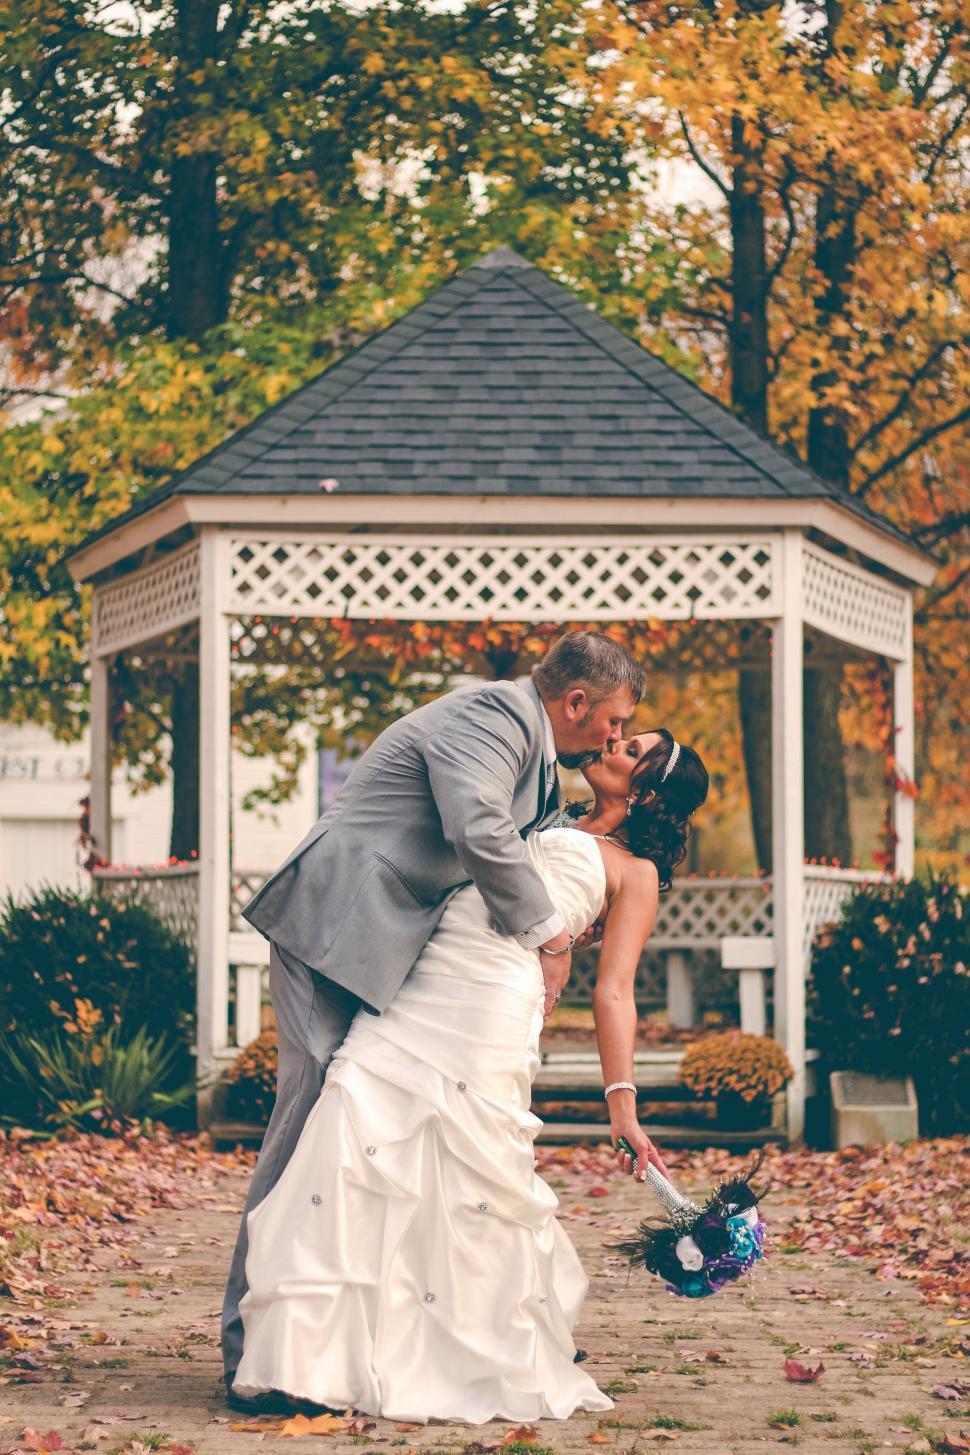 Free Image of Bride and Groom Kissing in Front of Gazebo 